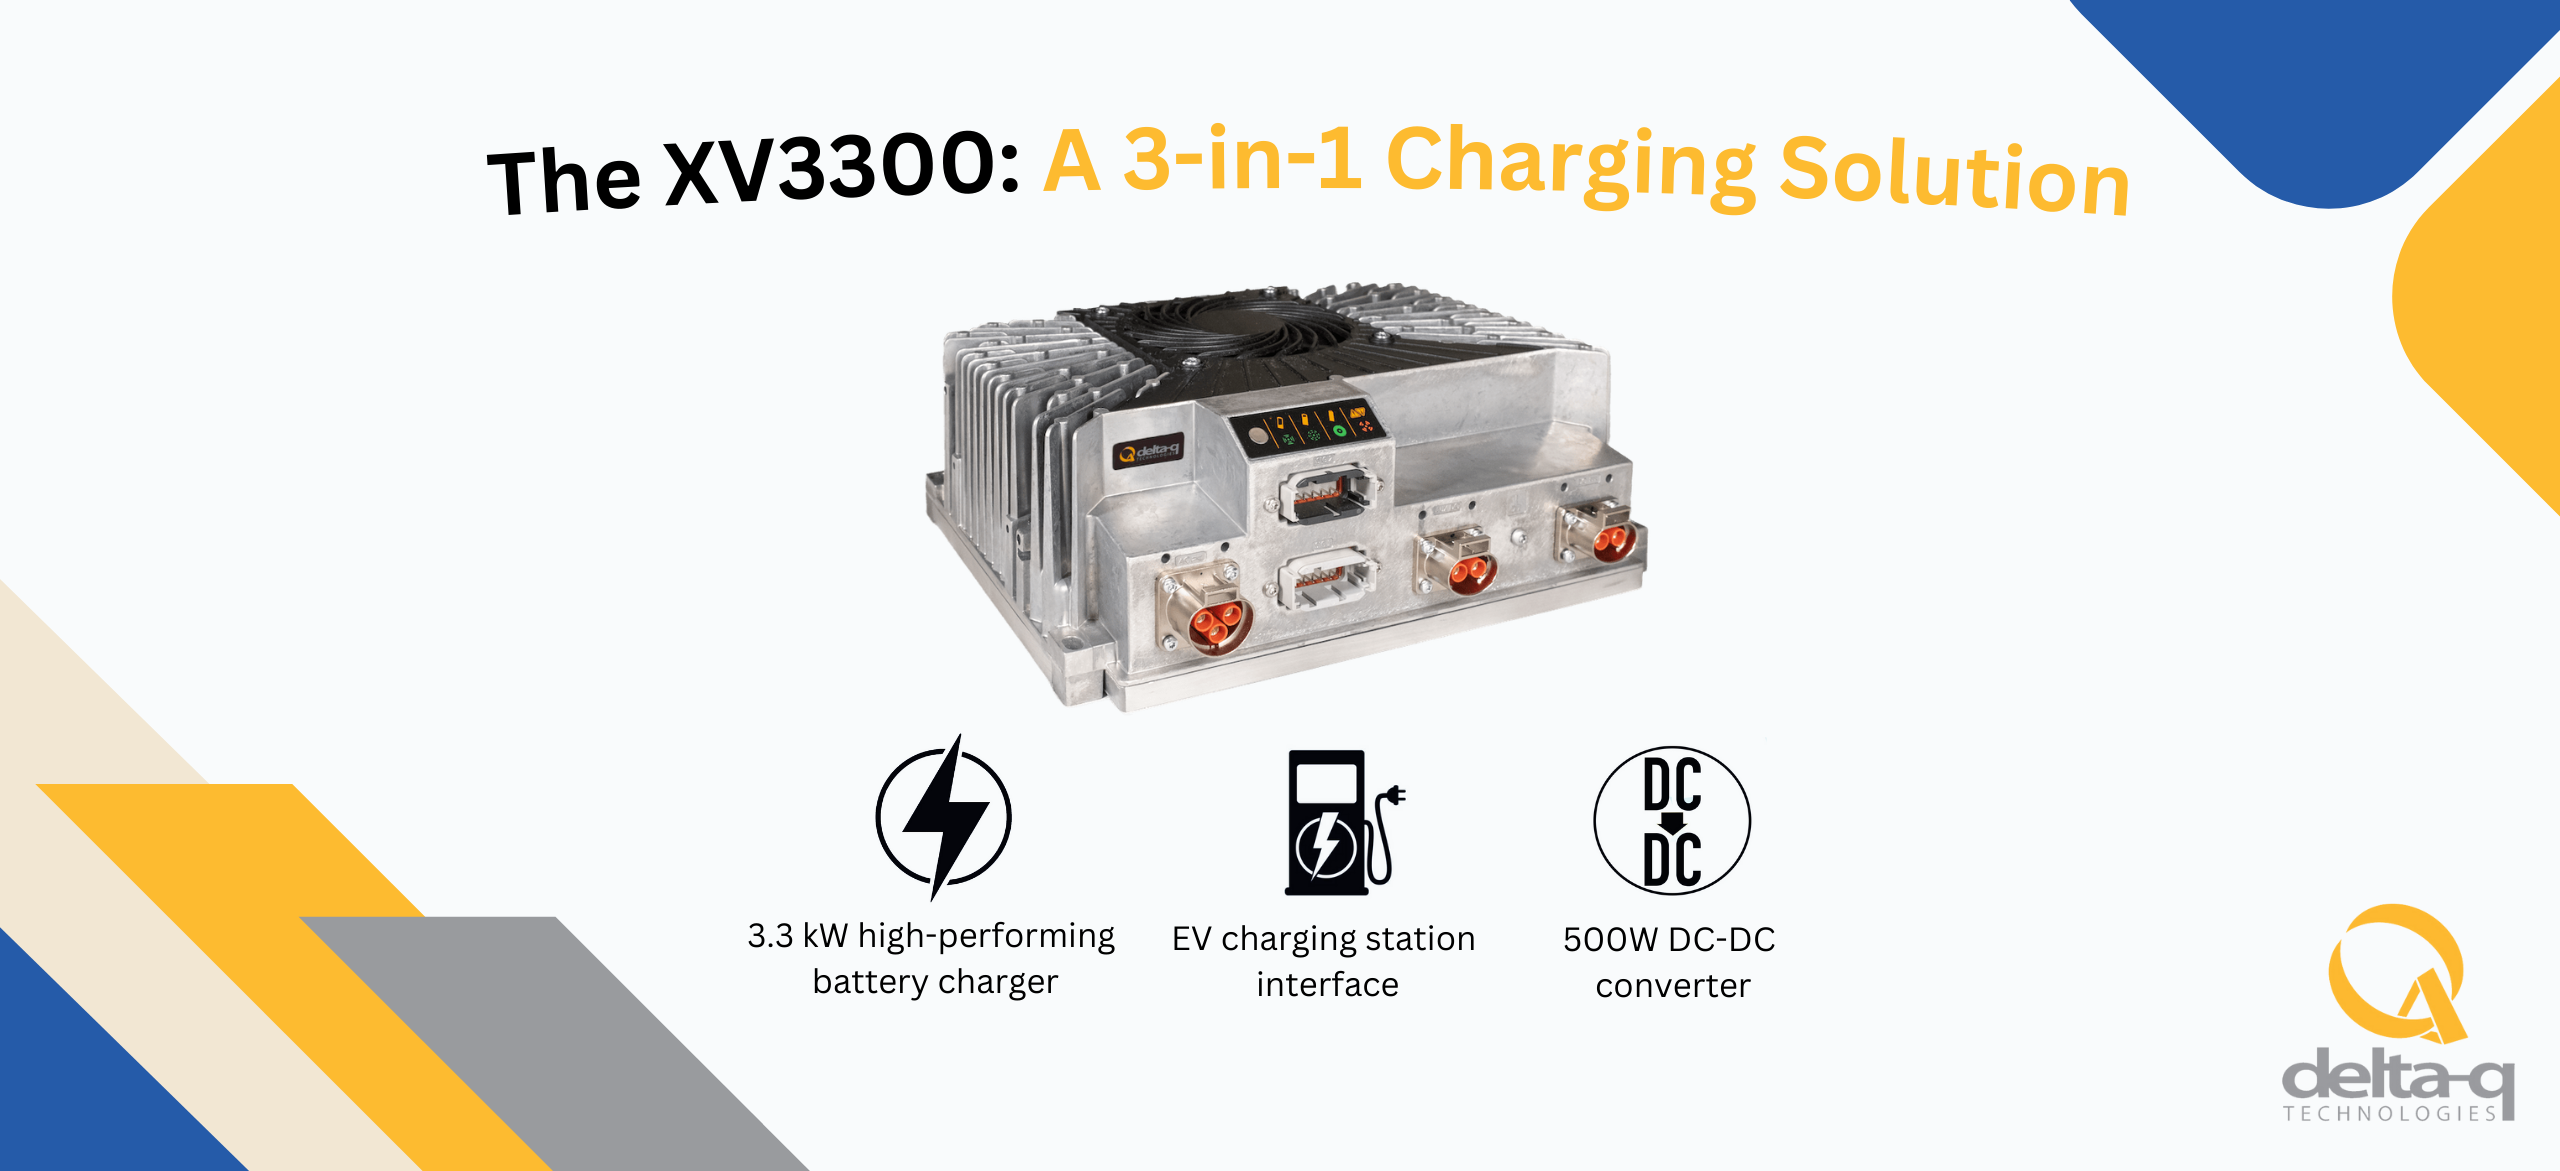 Press Release: Delta-Q Technologies Commences Full Production of its 3.3 kW Battery Charger